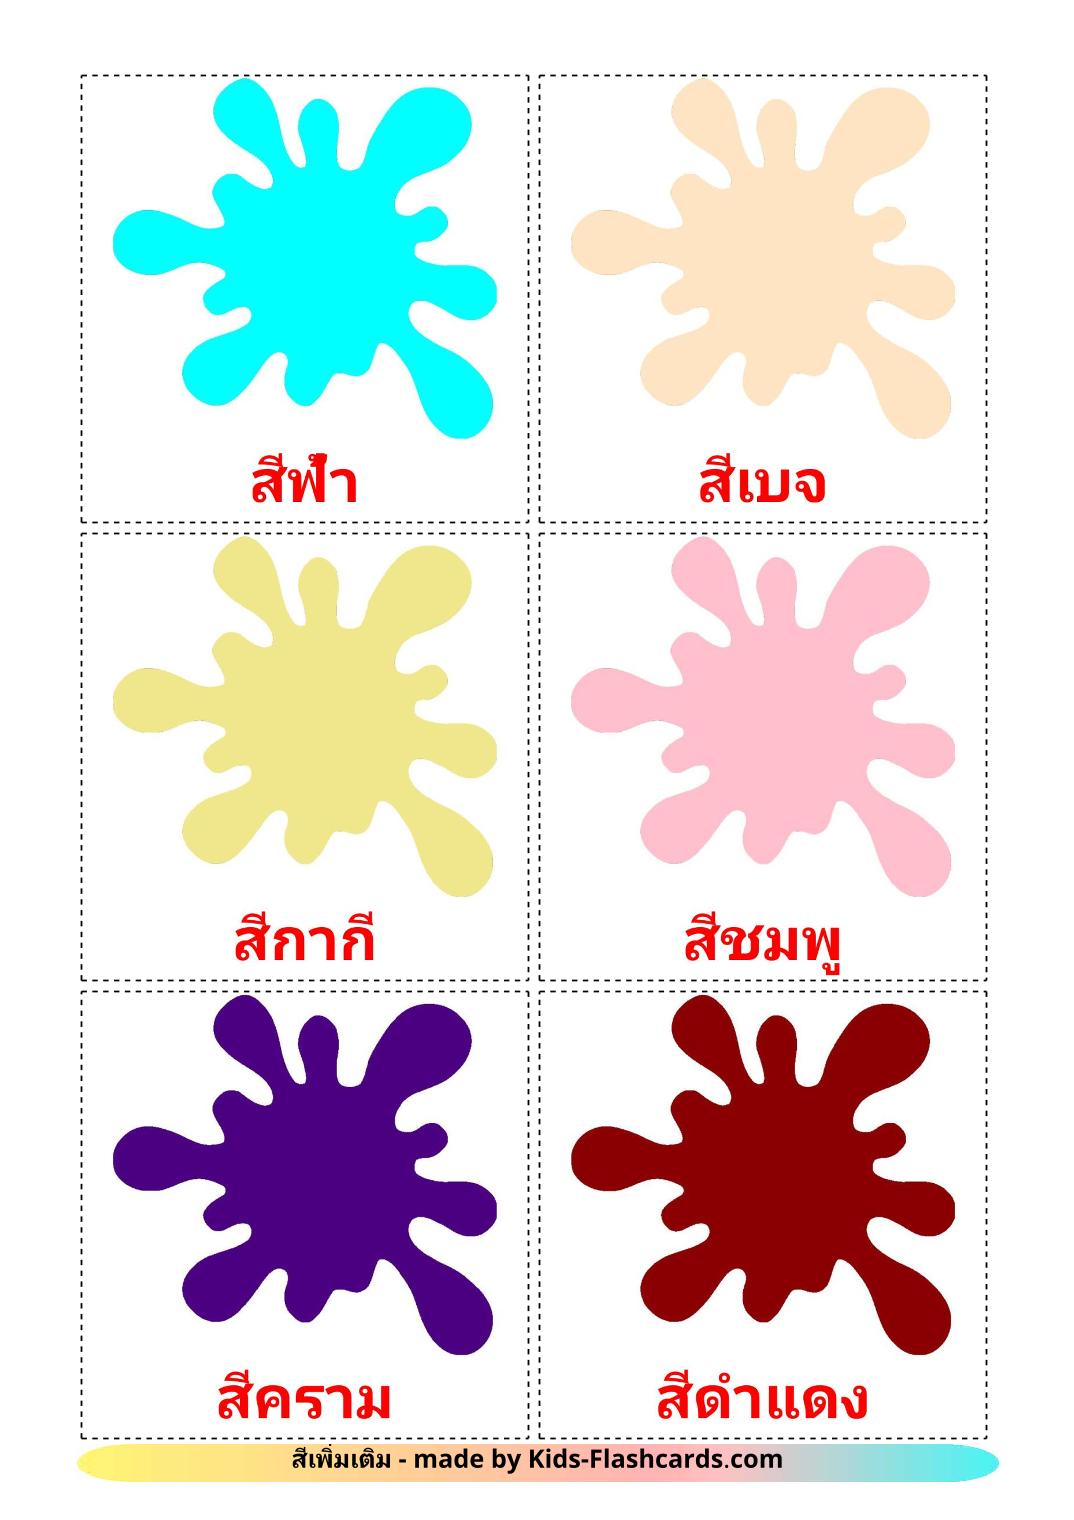 Secondary colors - 20 Free Printable thai Flashcards 